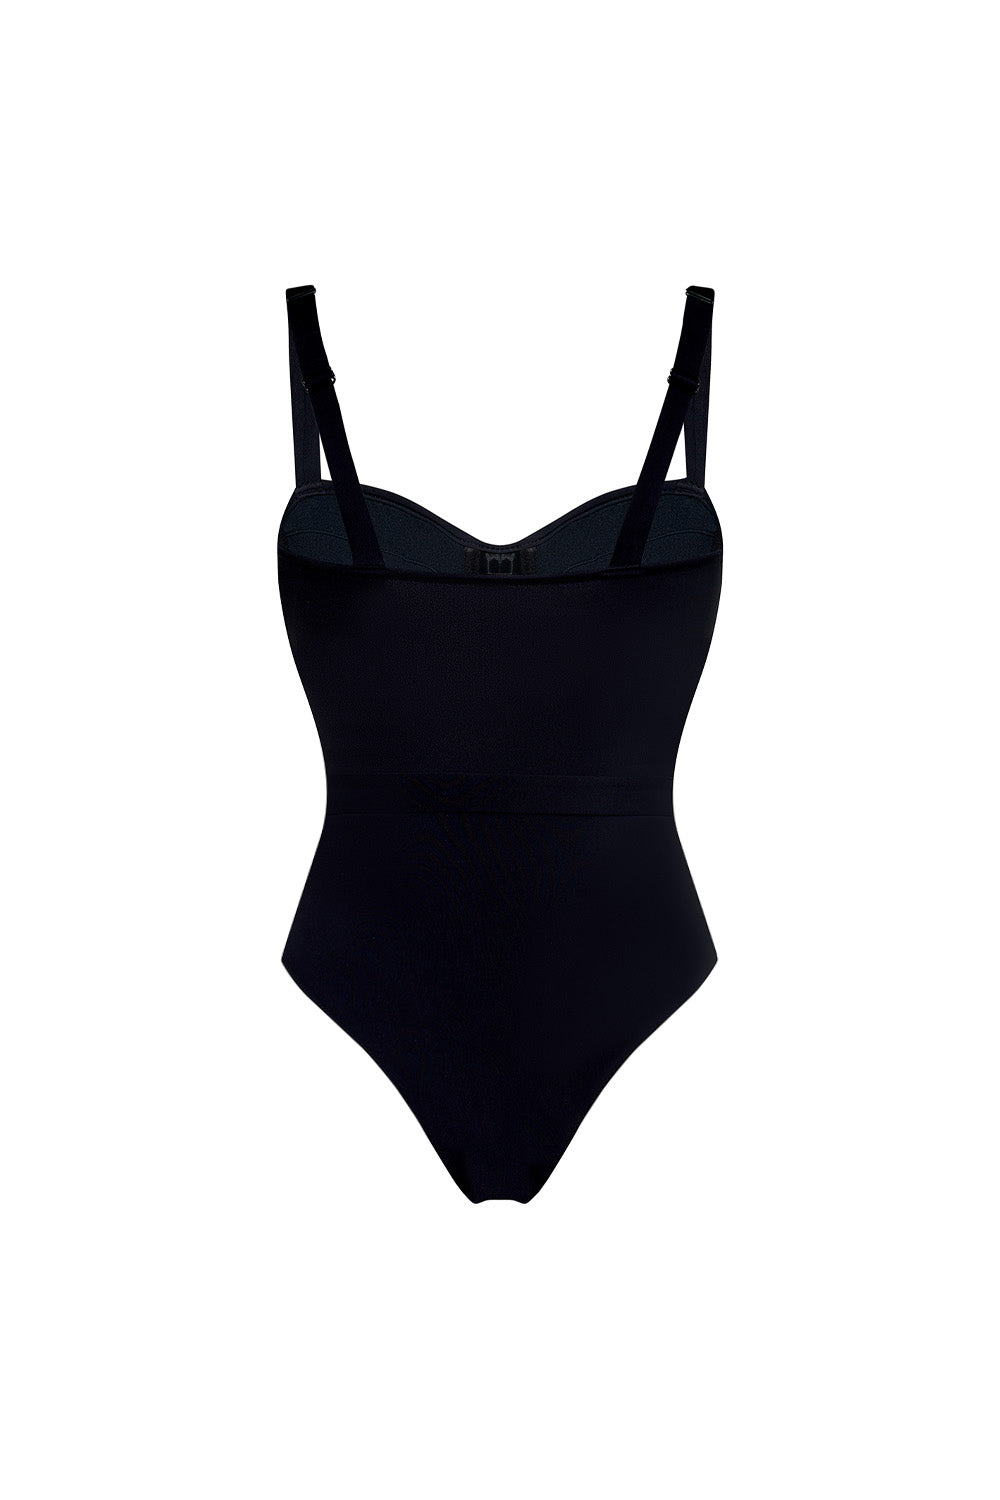 Swimsuit LILY-ROSE Black